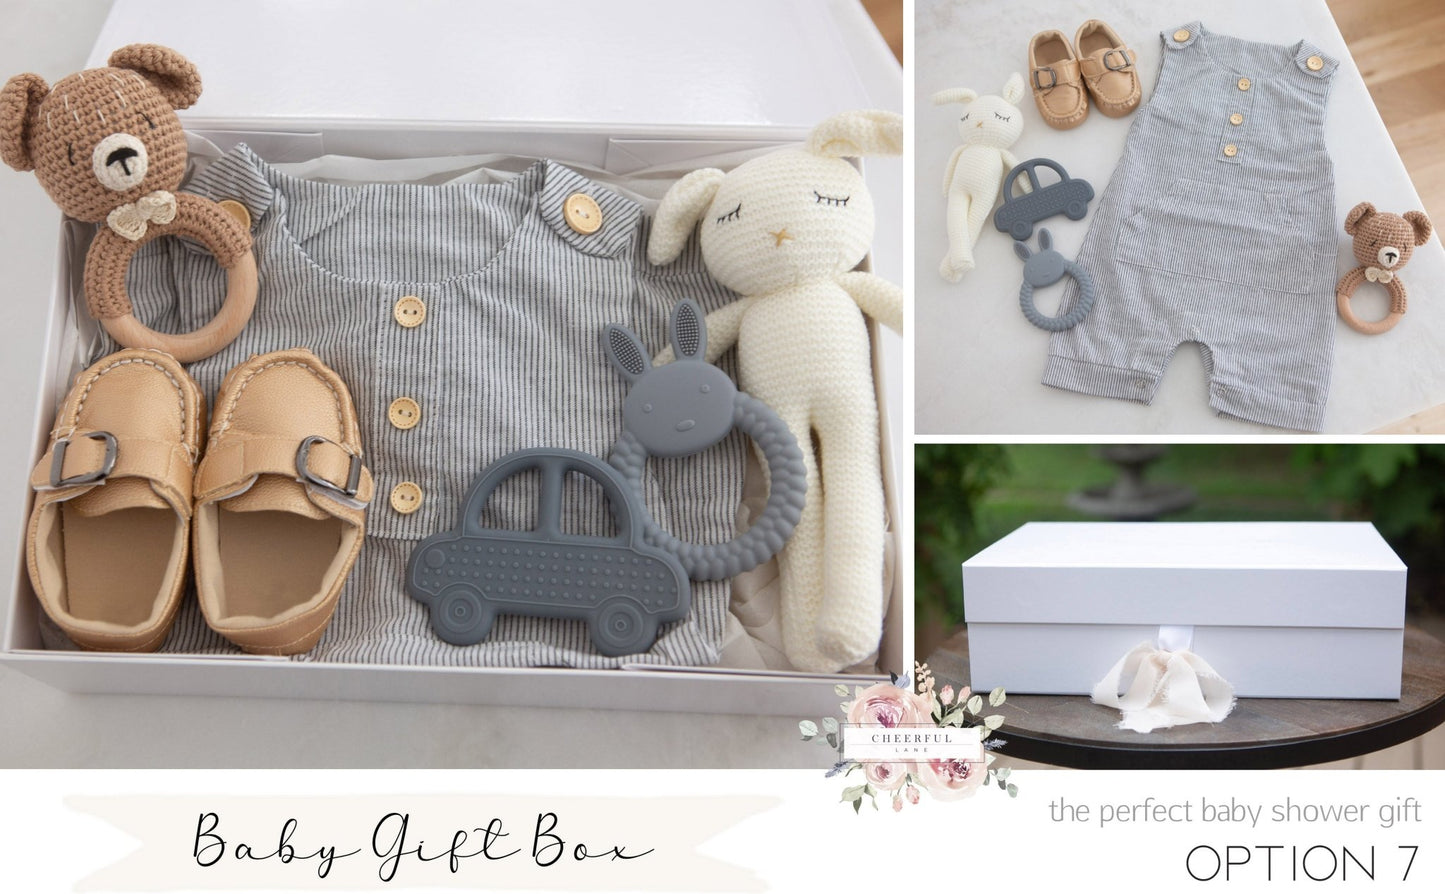 Load image into Gallery viewer, Baby Gift Box with personalized gift tag - Cheerful Lane
